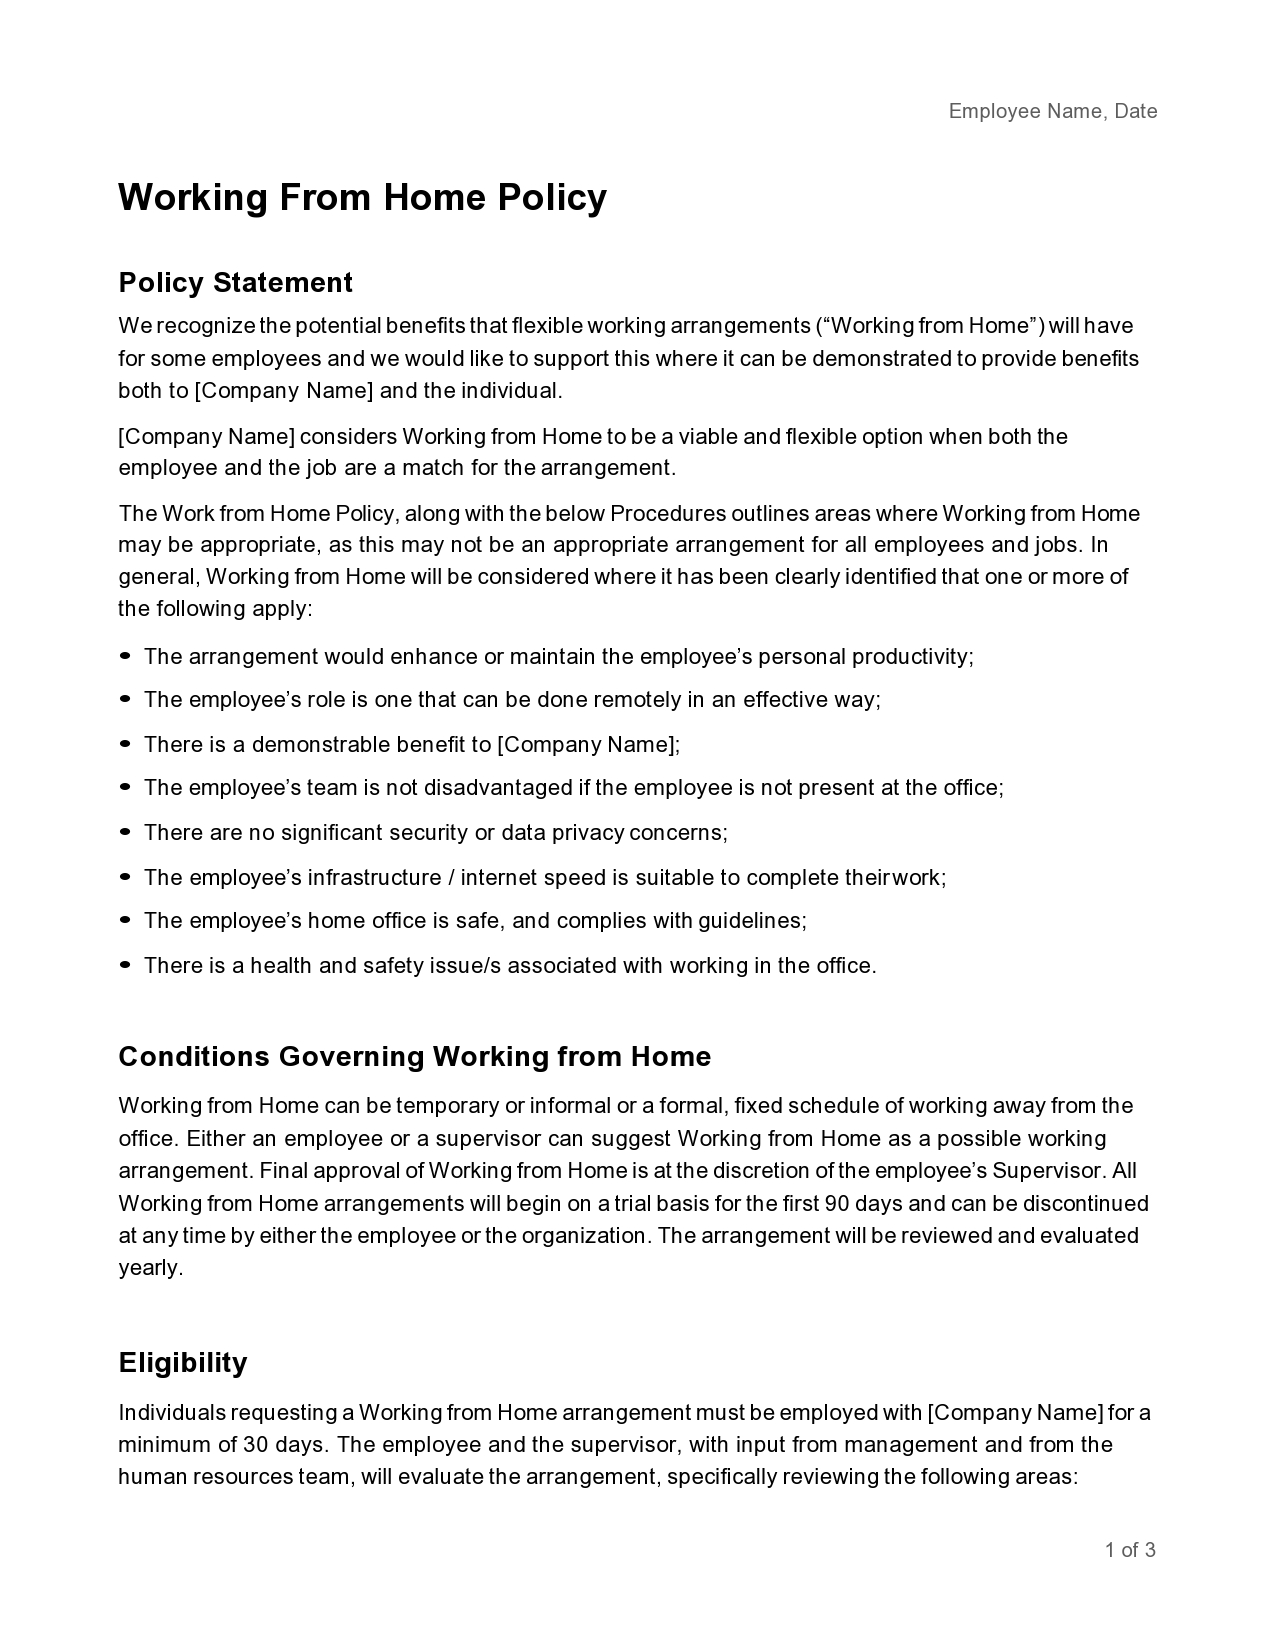 Free work from home policy 27